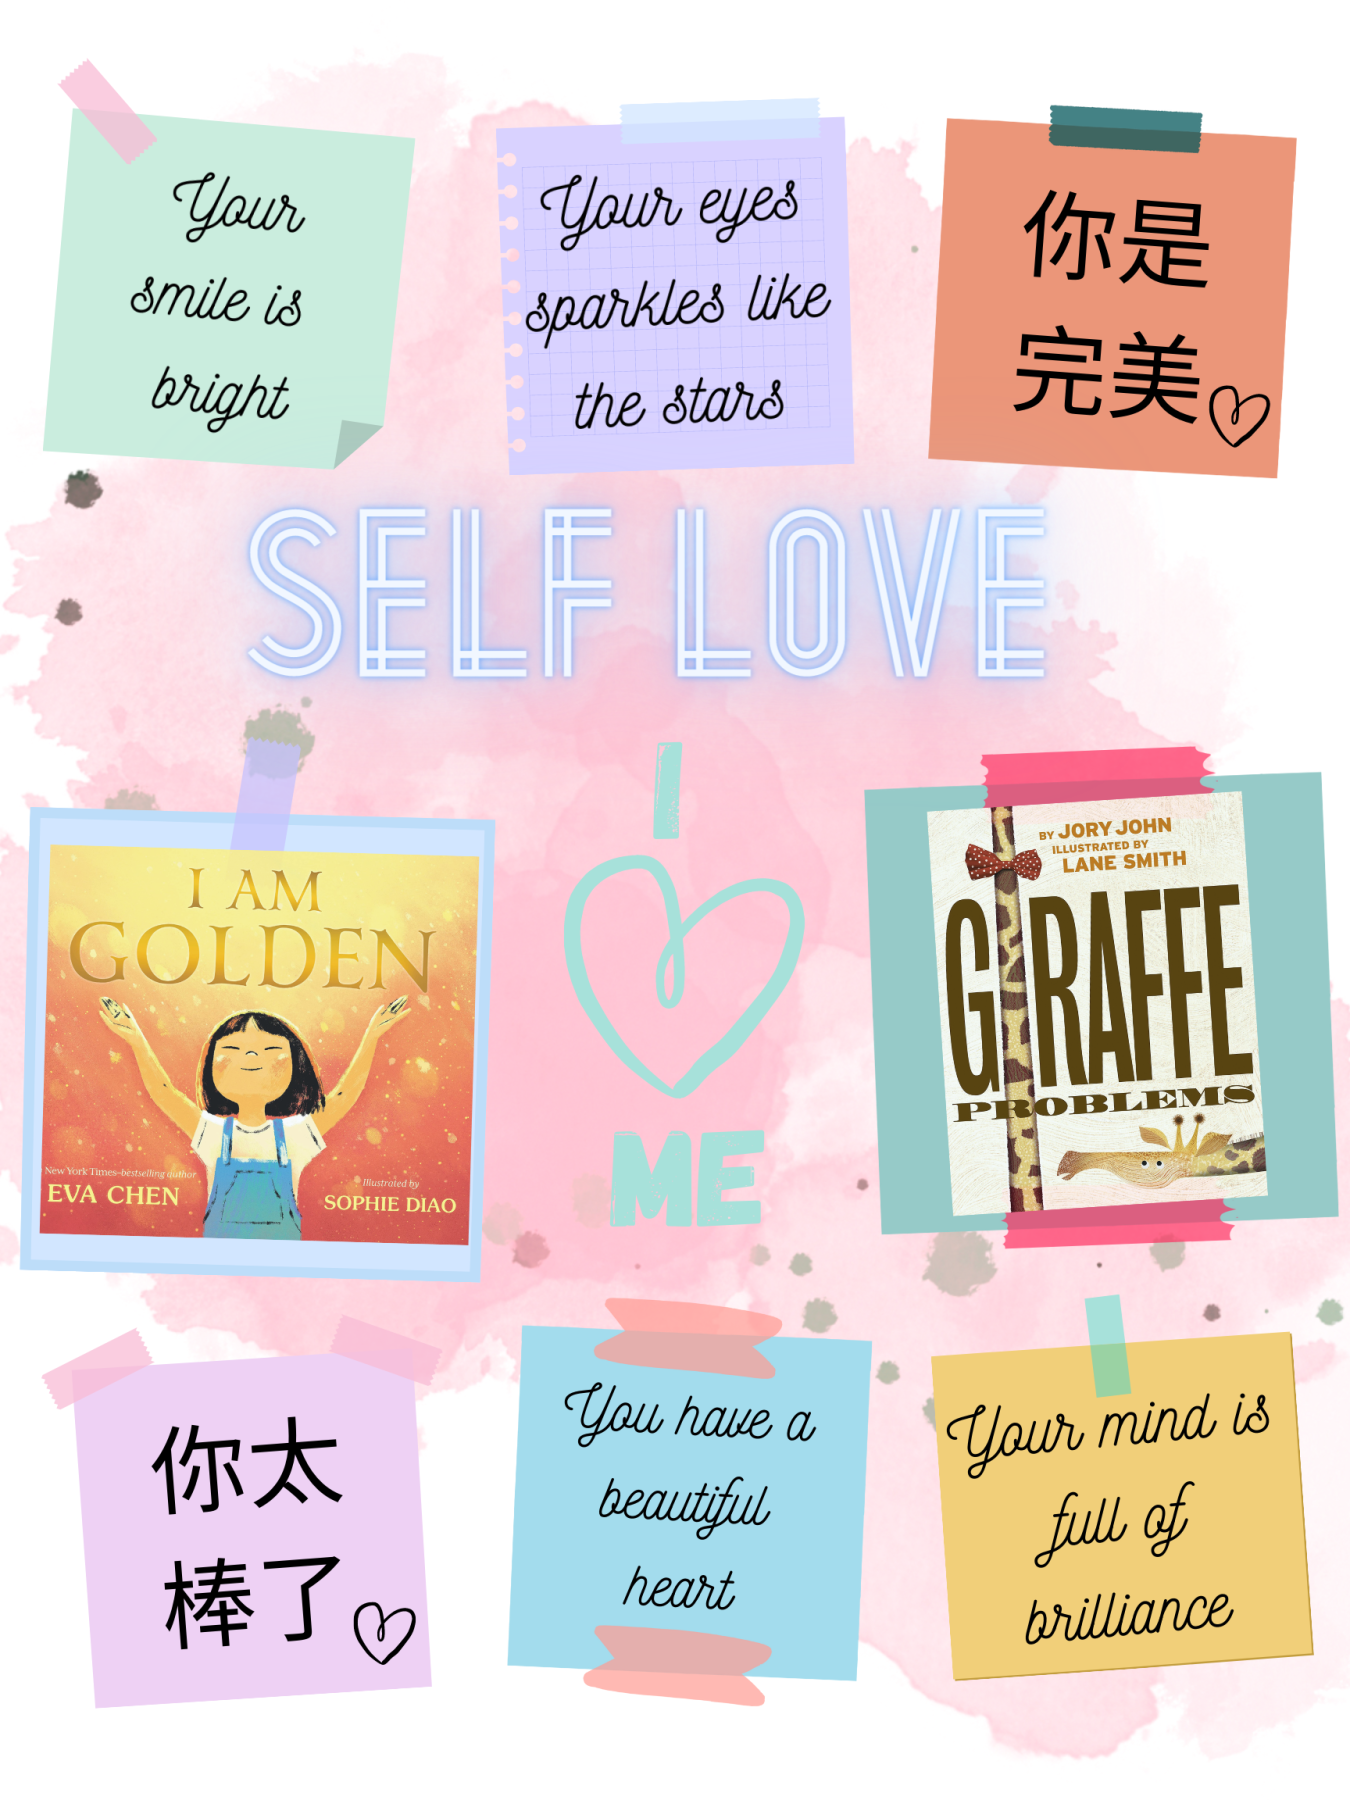 The two books we'll read during Storytime surrounded by post-its with affirmations in English and Chinese